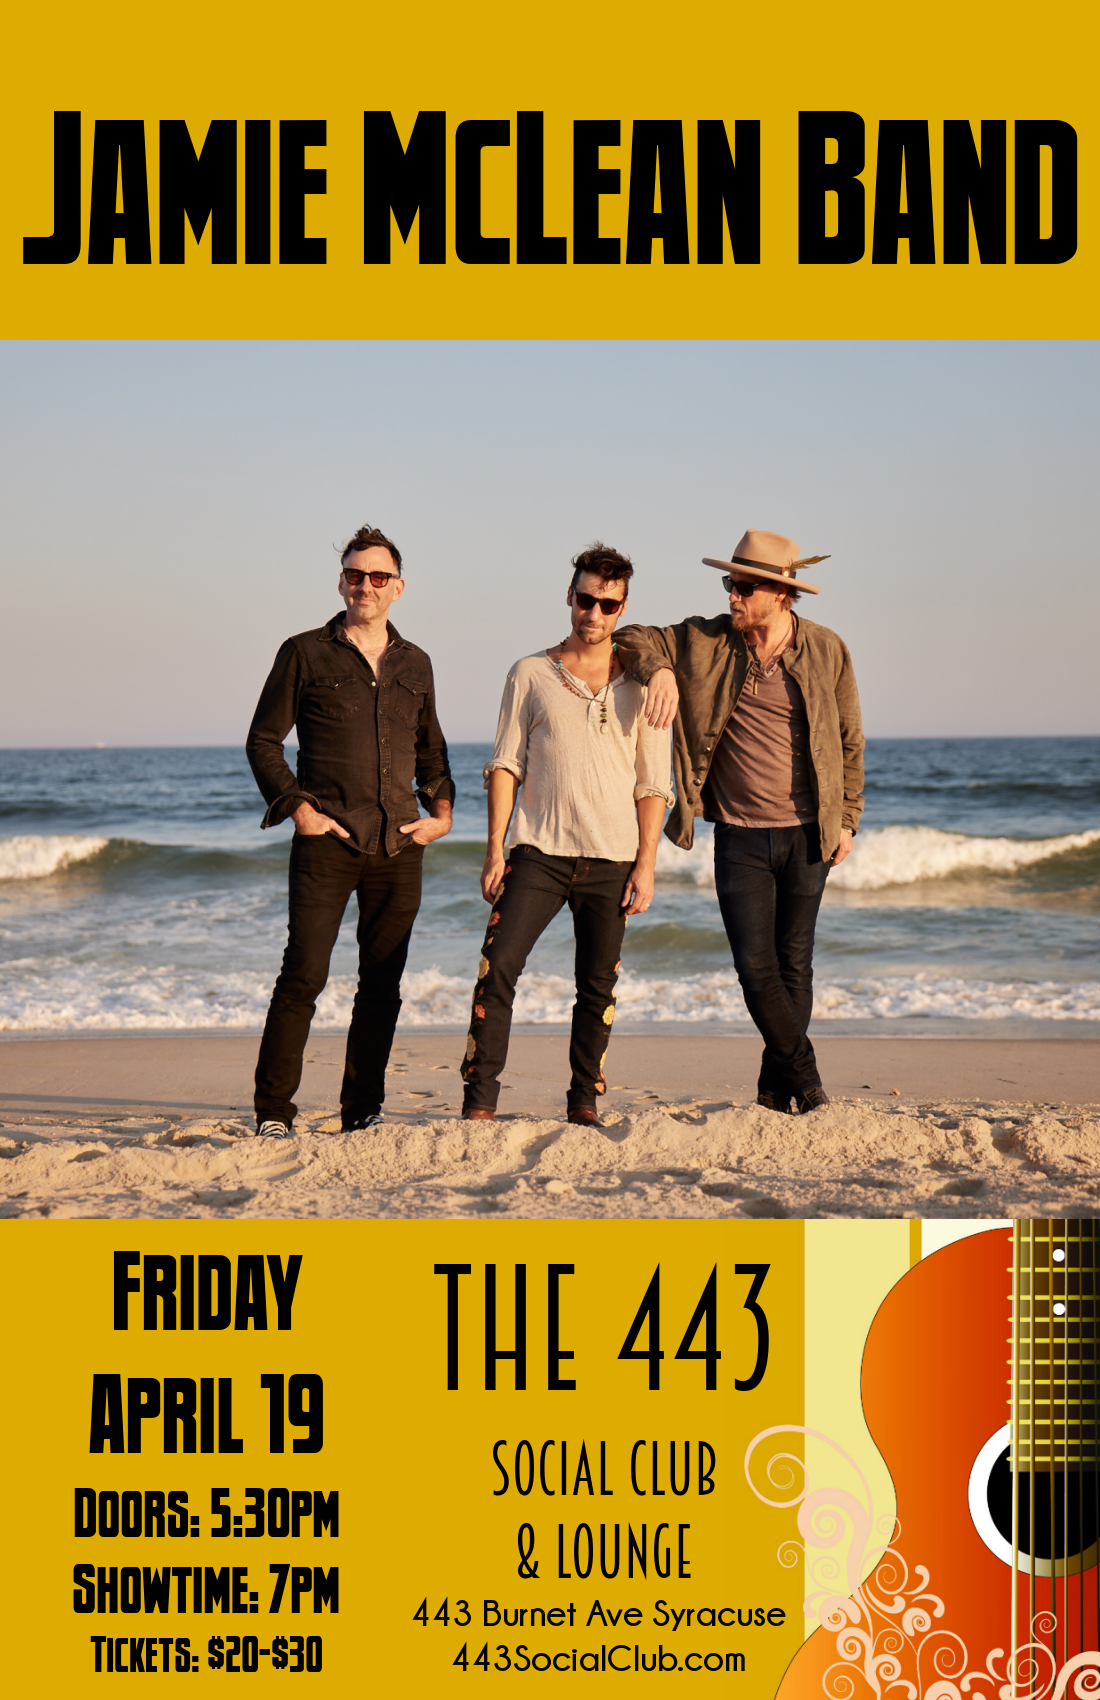 Jamie McLean band at the 443